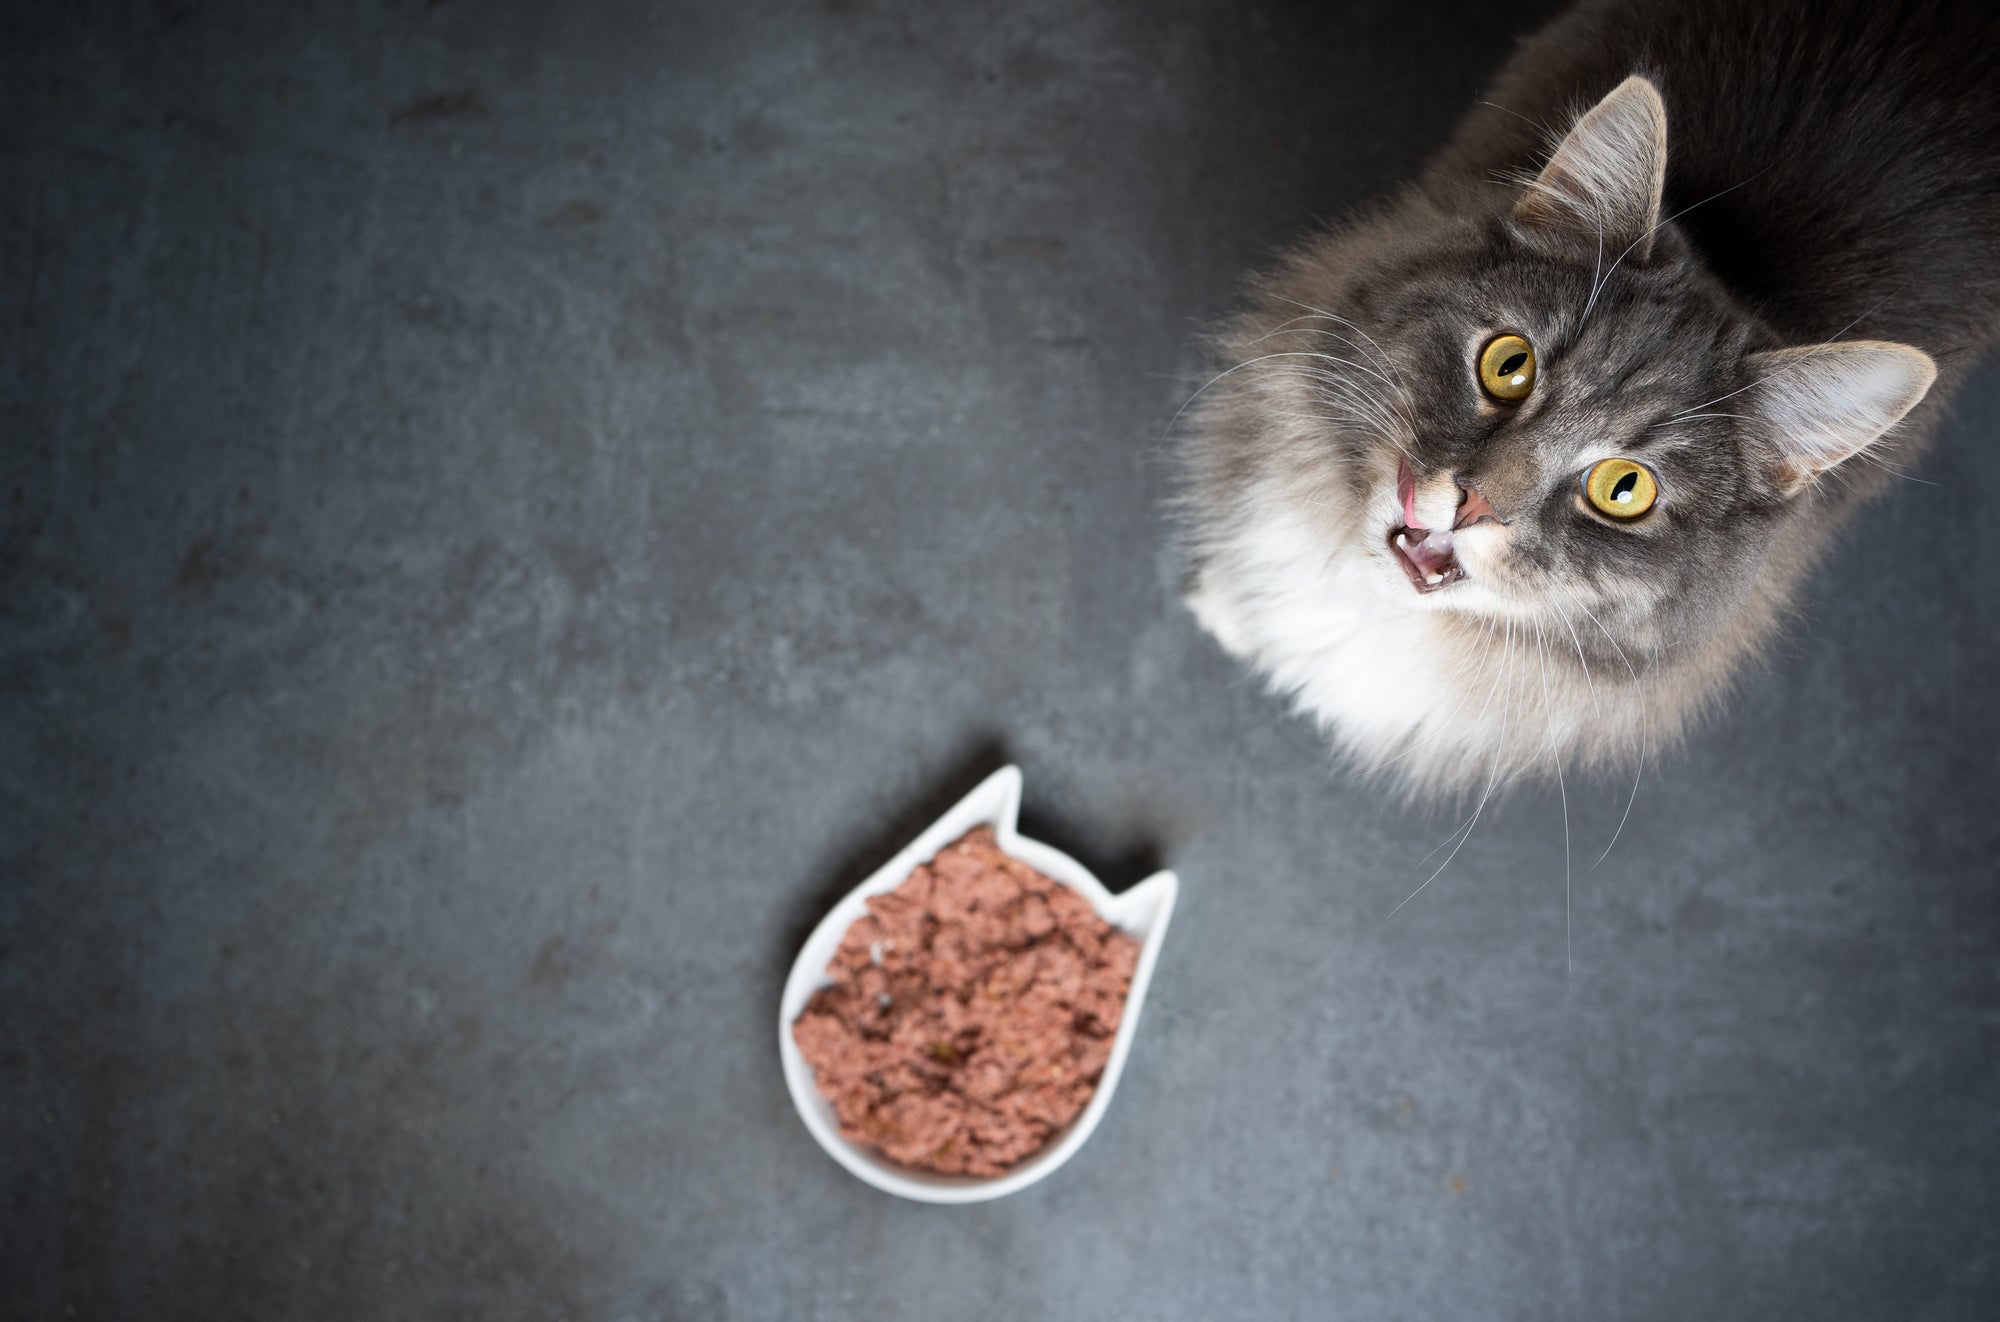 My cat seems hungry but won’t eat – what do I do?